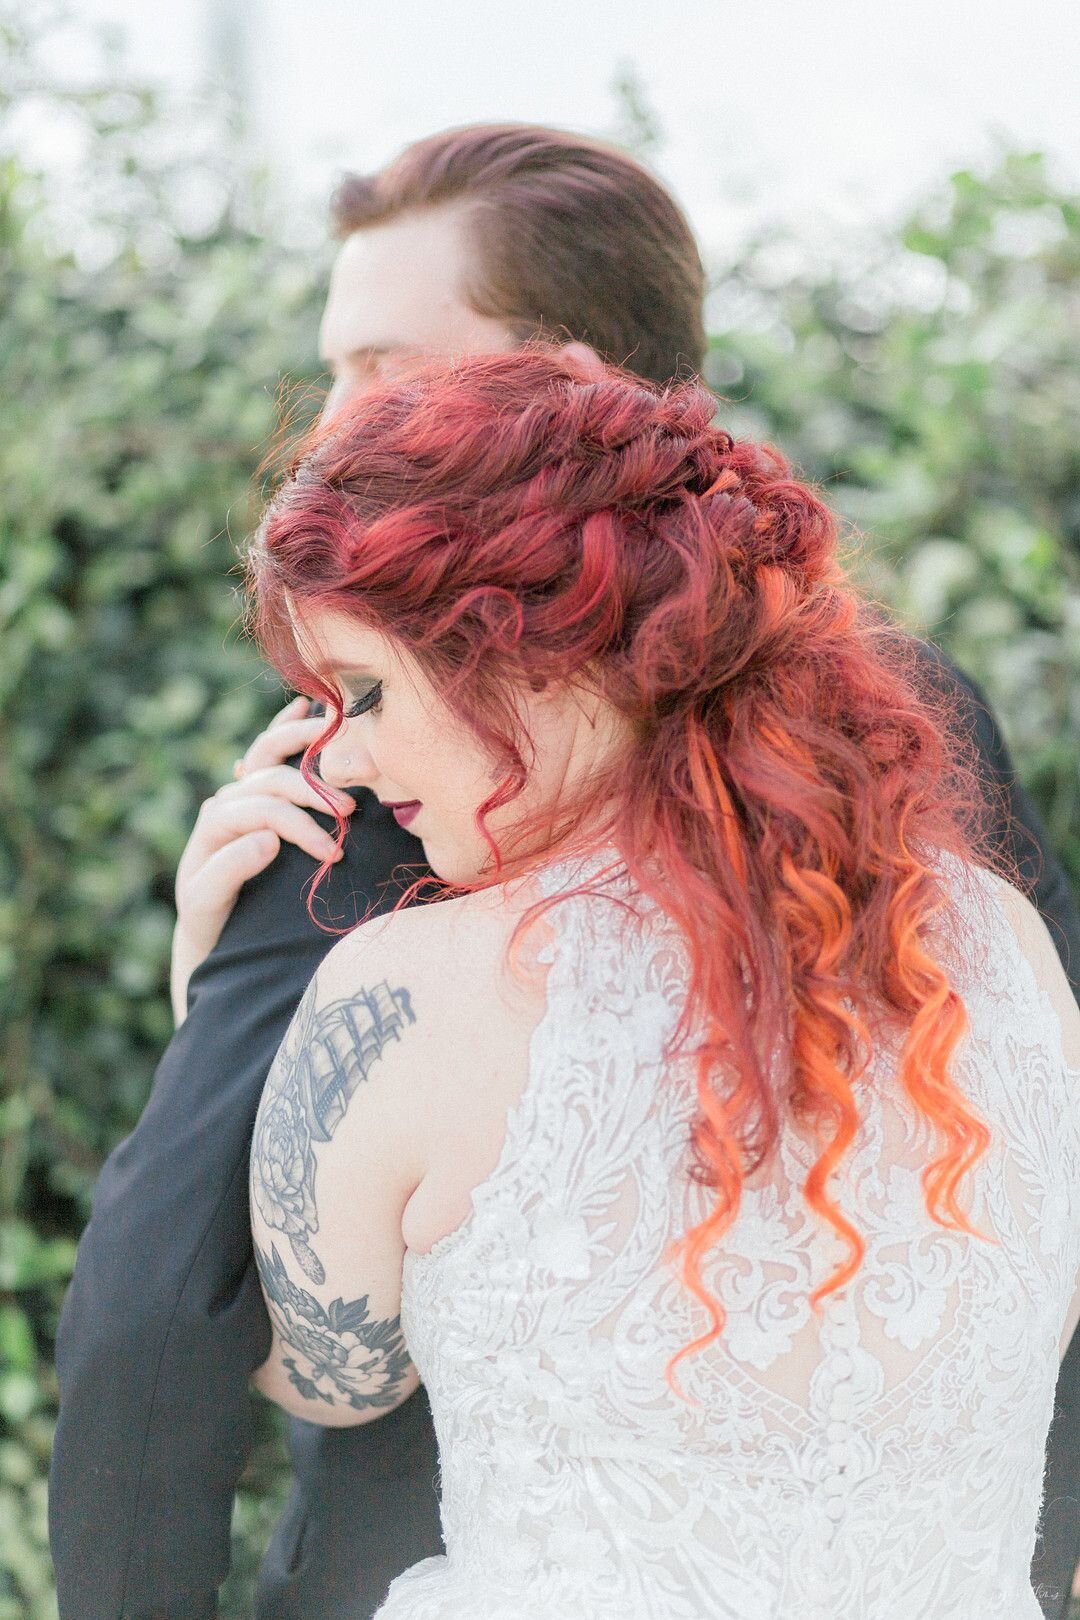 House Slytherin - A Harry Potter Inspired Styled Wedding_Jessica Thomas Photography_Slytherin-172_low.jpg